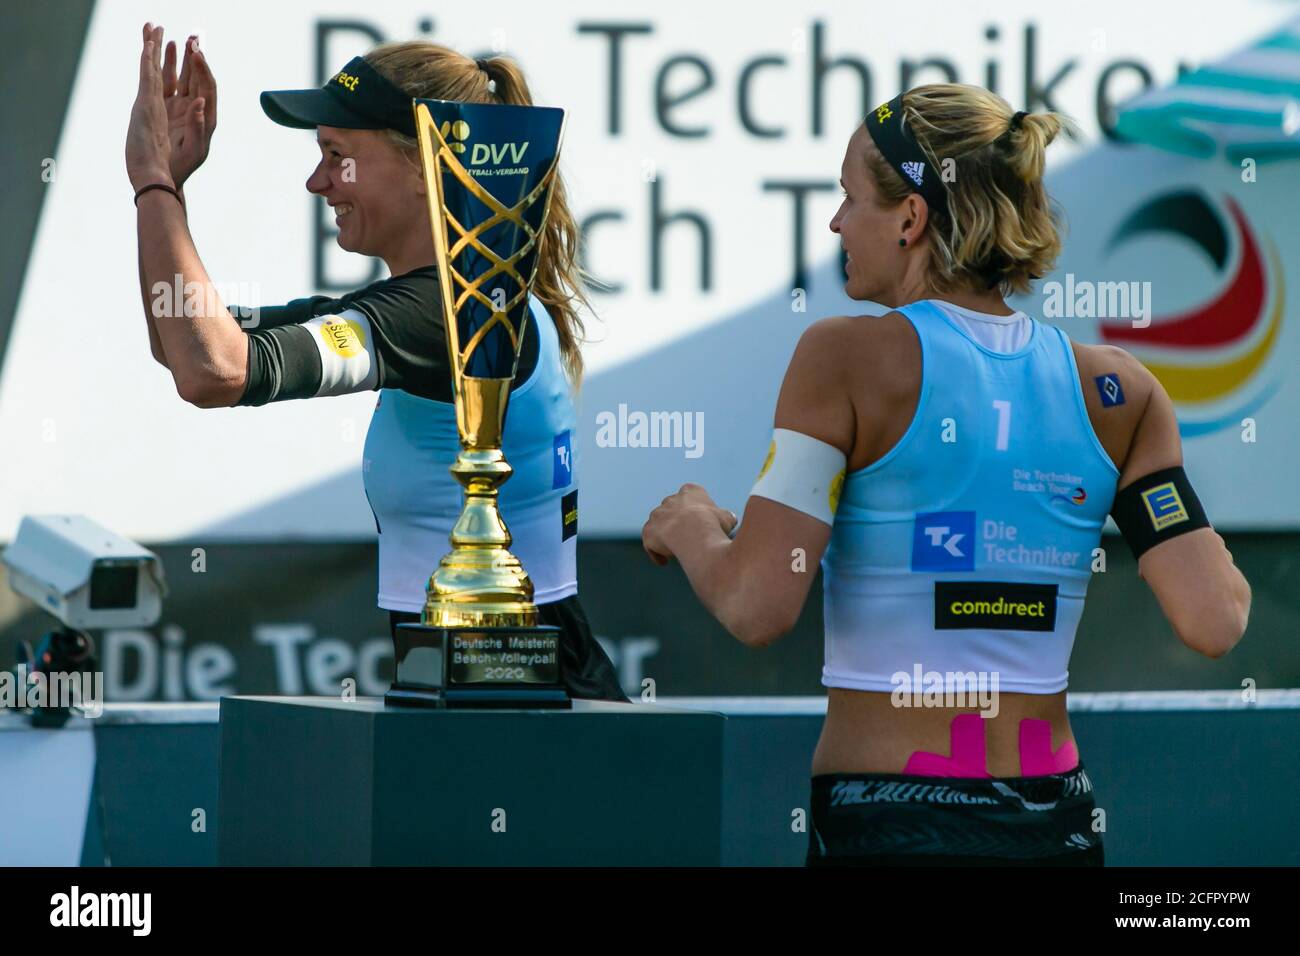 Timmendorfer Strand, Germany. 05th Sep, 2020. Laura Ludwig (r) and Margareta Kozuch (Hamburg) walk past the DM trophy at the German Beach Volleyball Championships during the award ceremony. Credit: Frank Molter/dpa/Alamy Live News Stock Photo